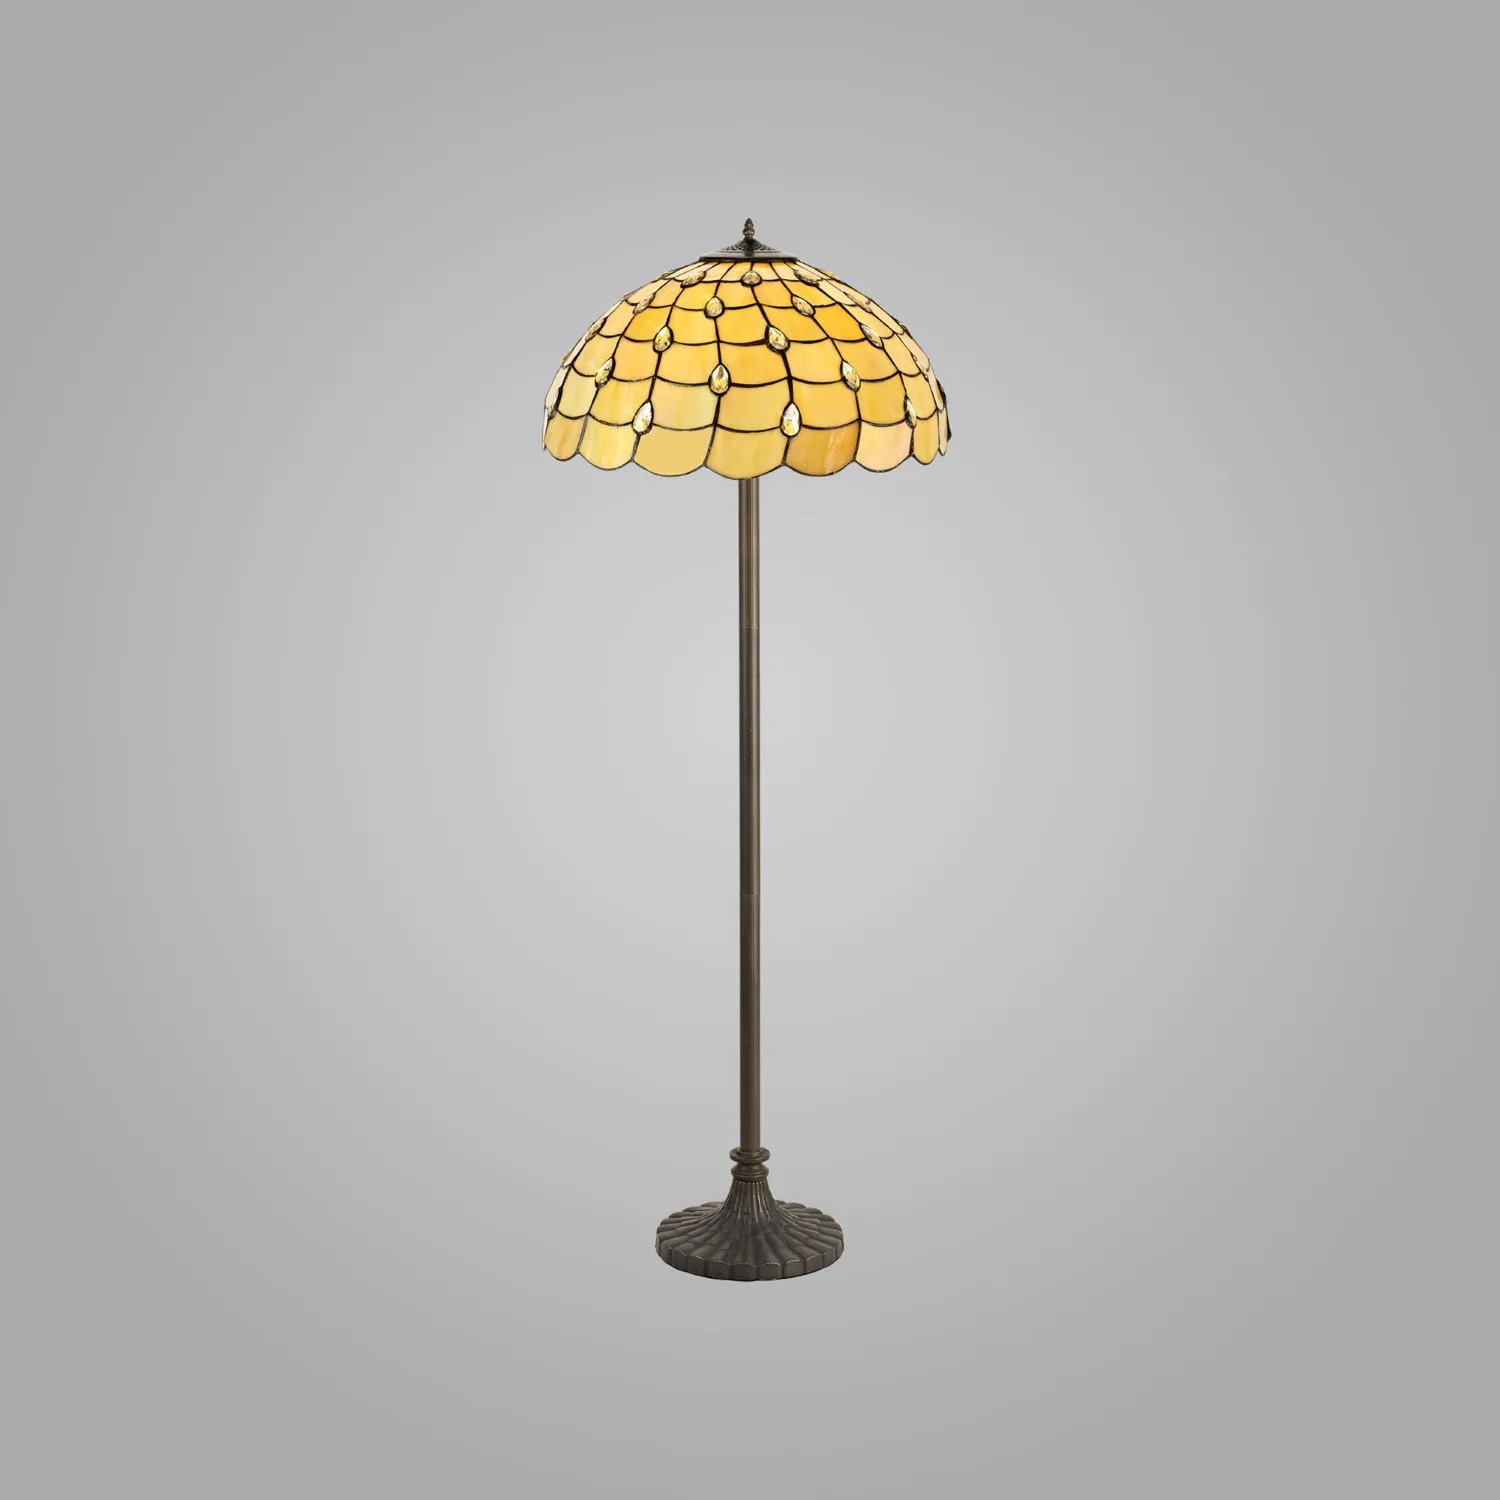 Stratford 2 Light Stepped Design Floor Lamp E27 With 50cm Tiffany Shade, Beige Clear Crystal Aged Antique Brass